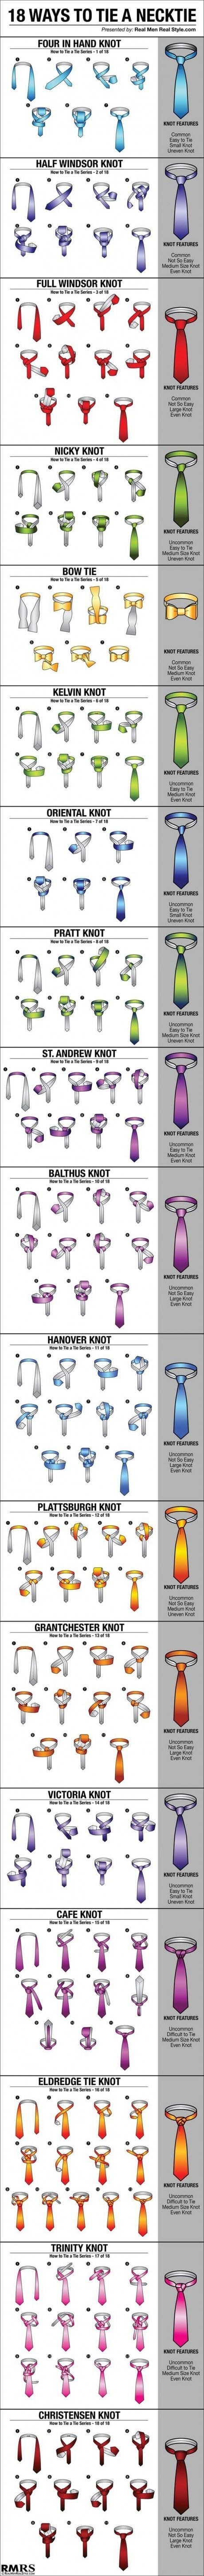 Are you ready for this? Eighteen ways to tie a necktie. EIGHTEEN WAYS! That's a lot of ways!